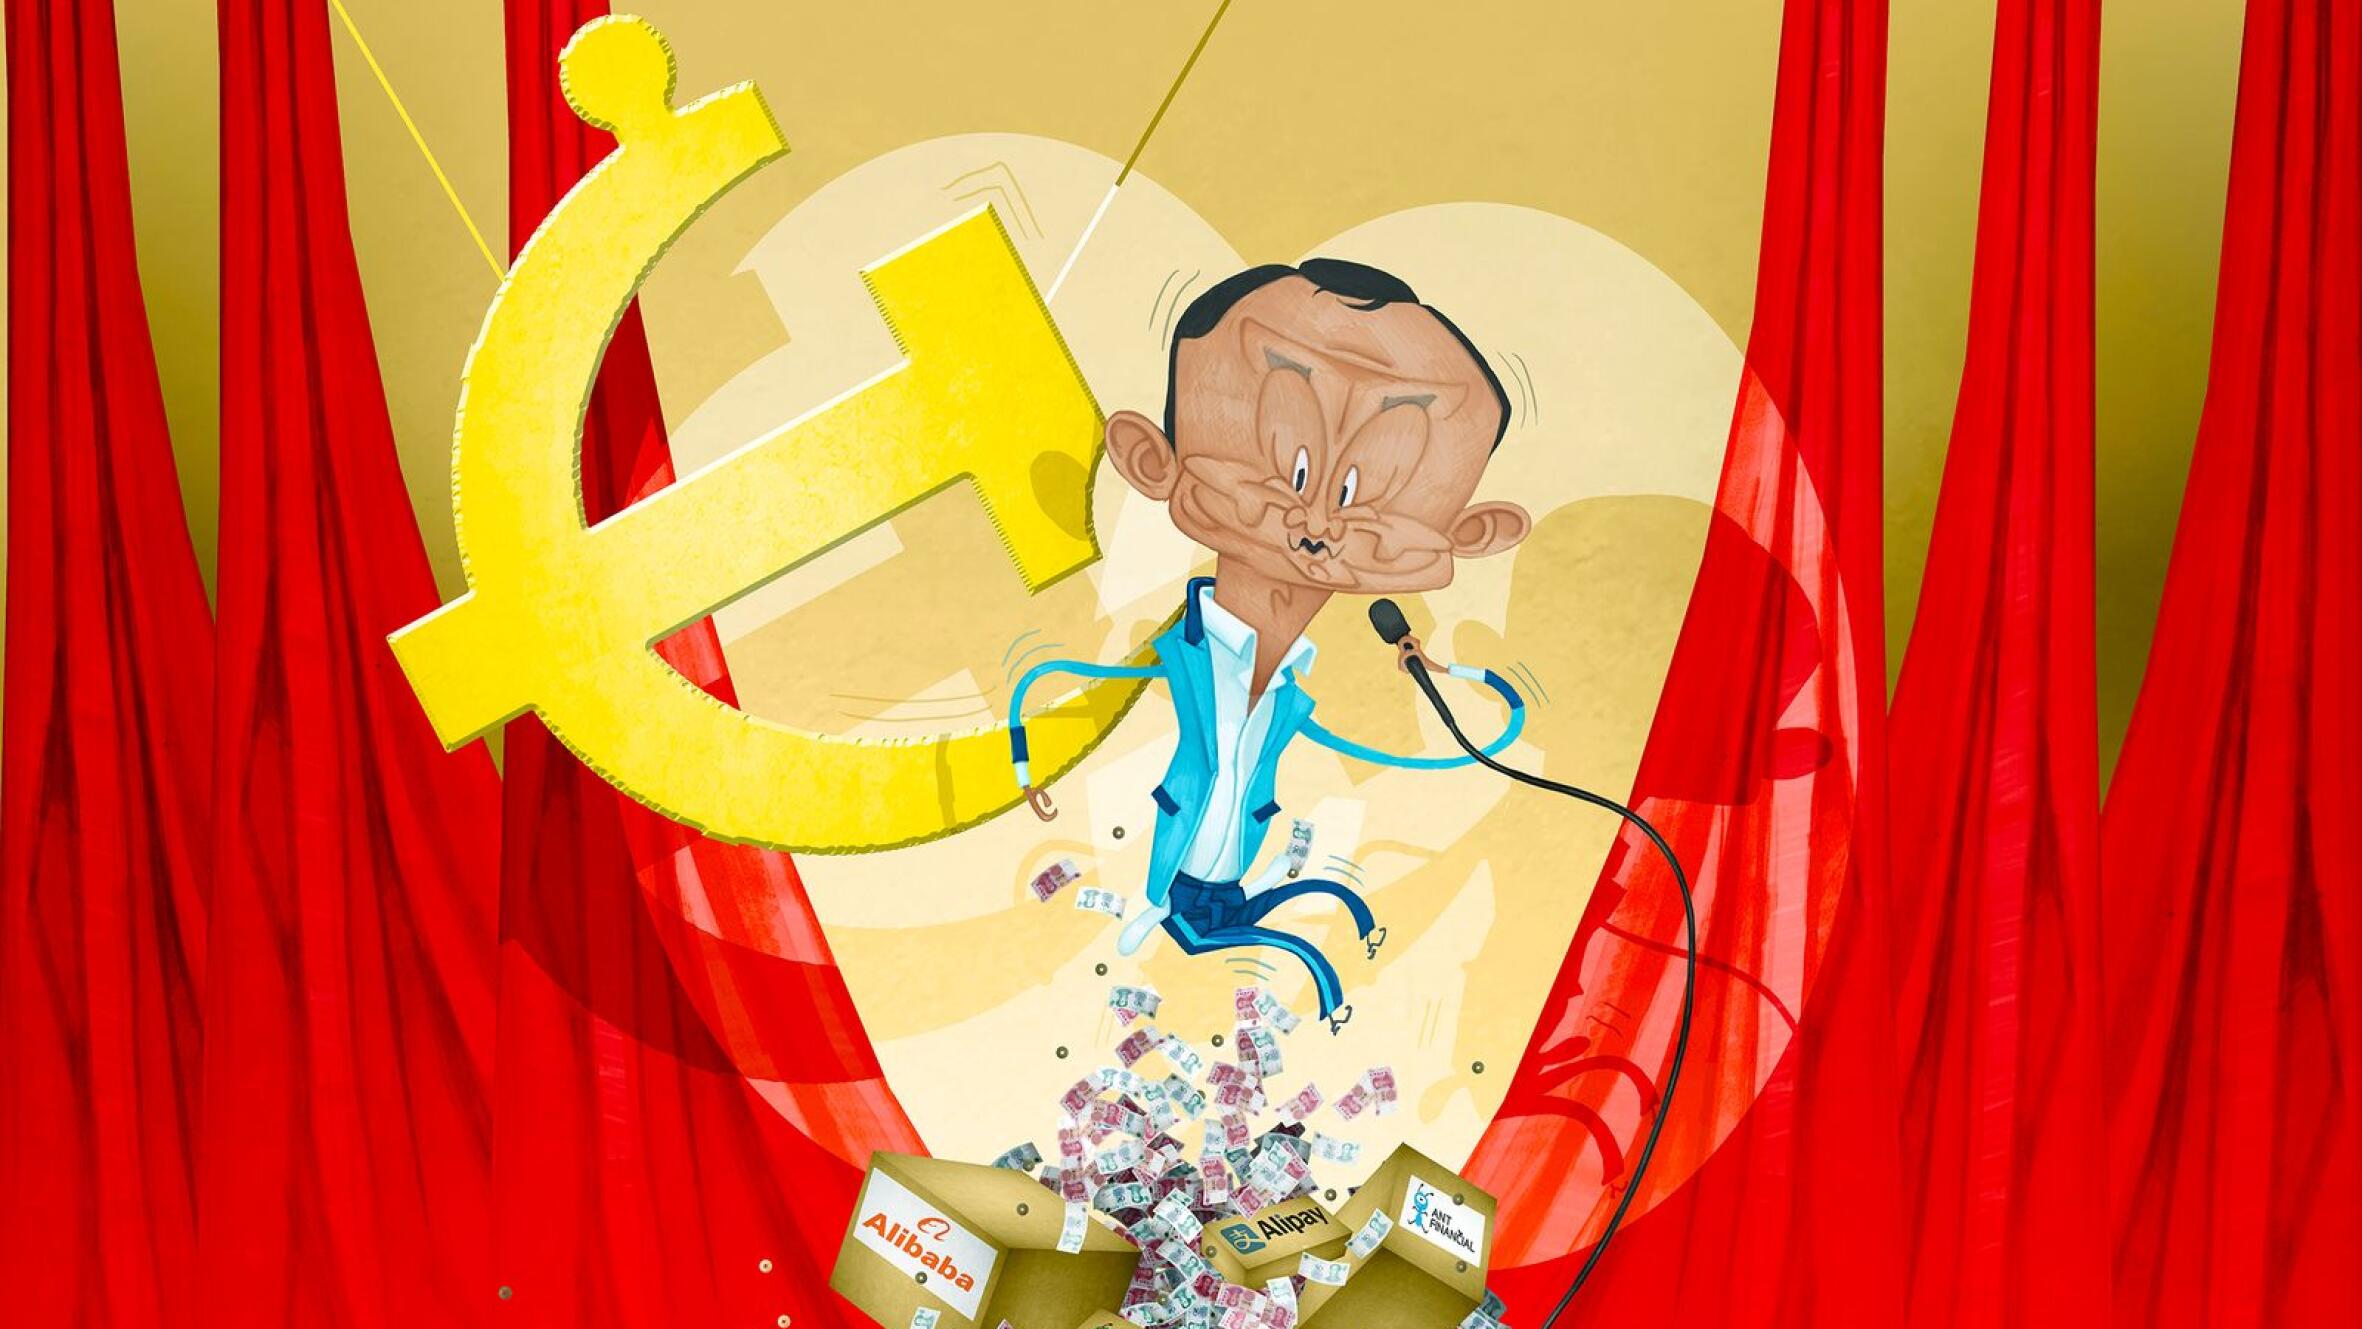 Jack Ma profile: how China is making the Alibaba and Ant Group founder pay  for his outspoken stance | Business Post